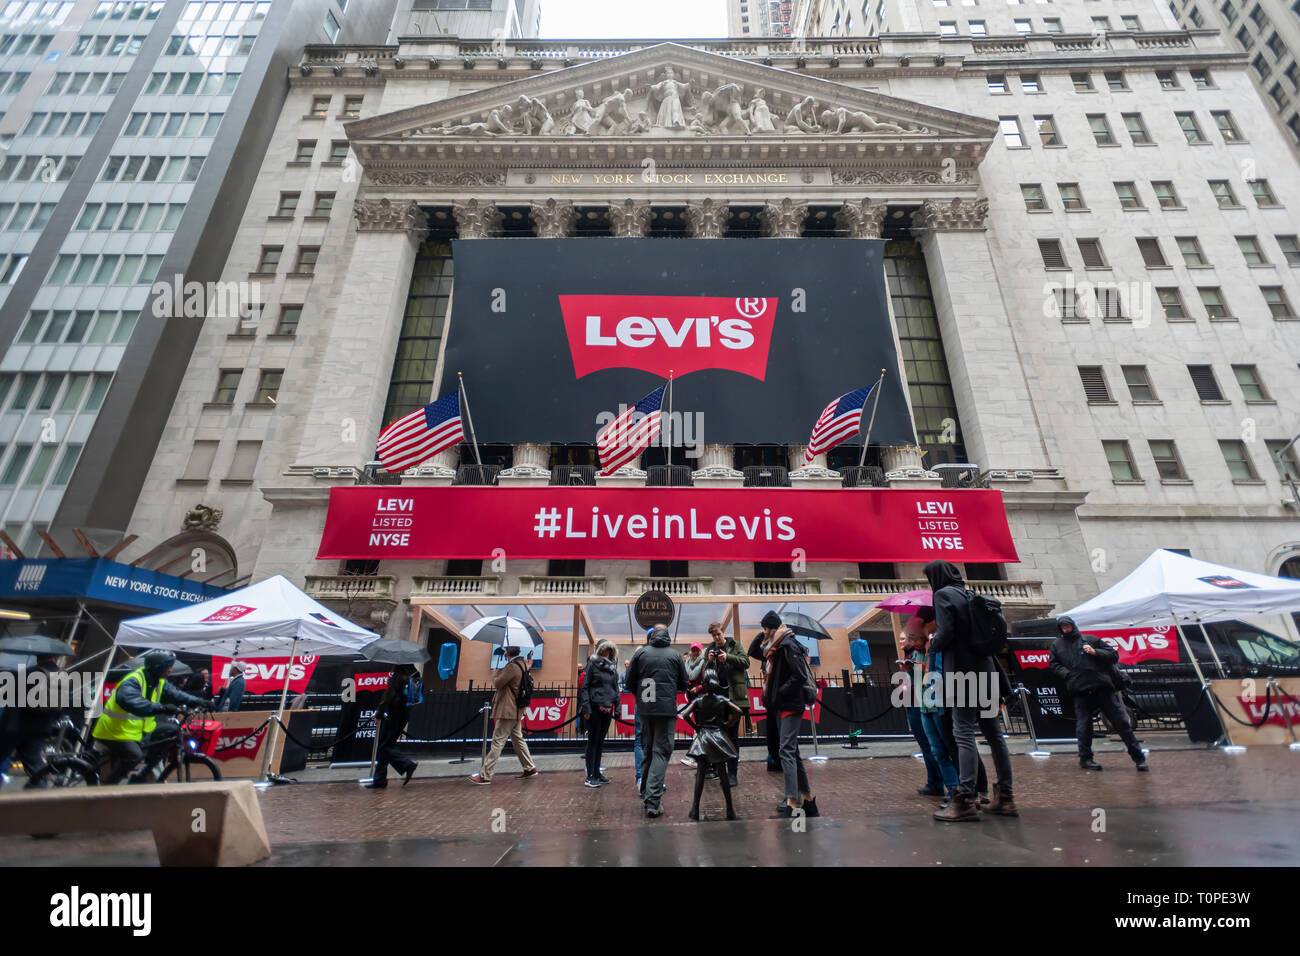 Lower Manhattan, York, USA. 21st Mar 2019. The York Stock Exchange in Lower Manhattan is decorated for the first day of trading for the Levi Strauss & Co. initial public